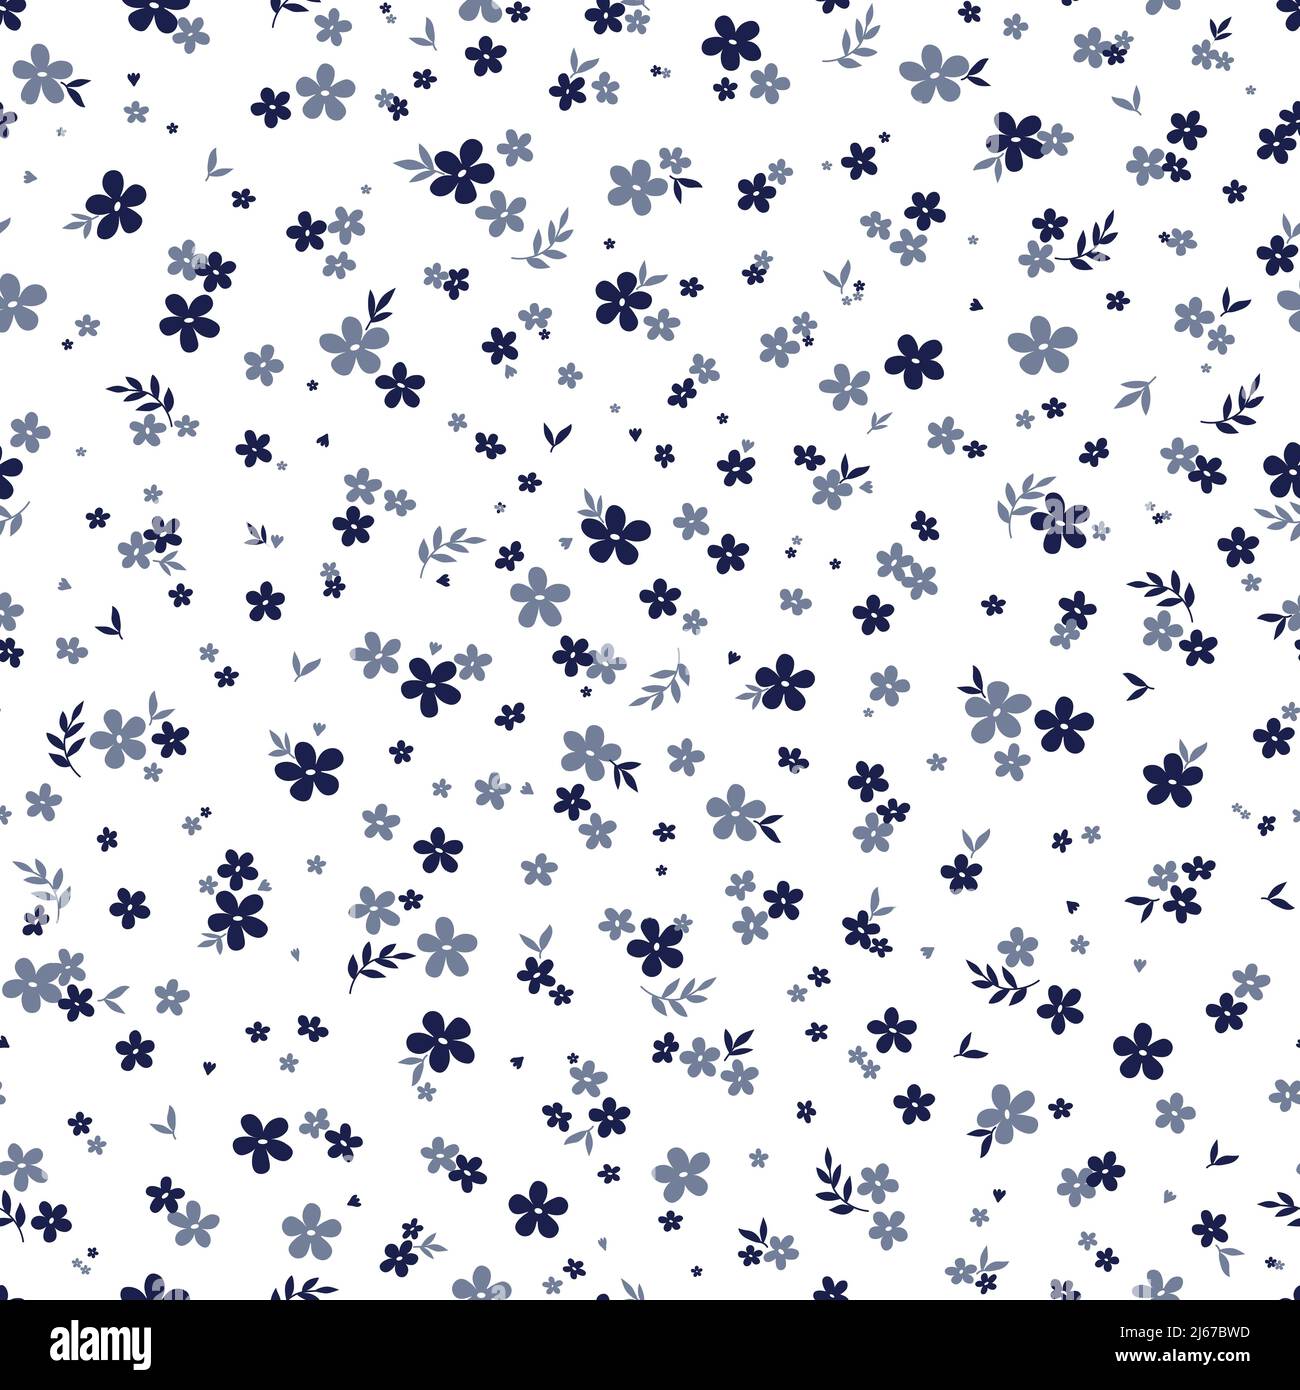 Floral seamless pattern with cute small blue flowers on white. Ditsy ...